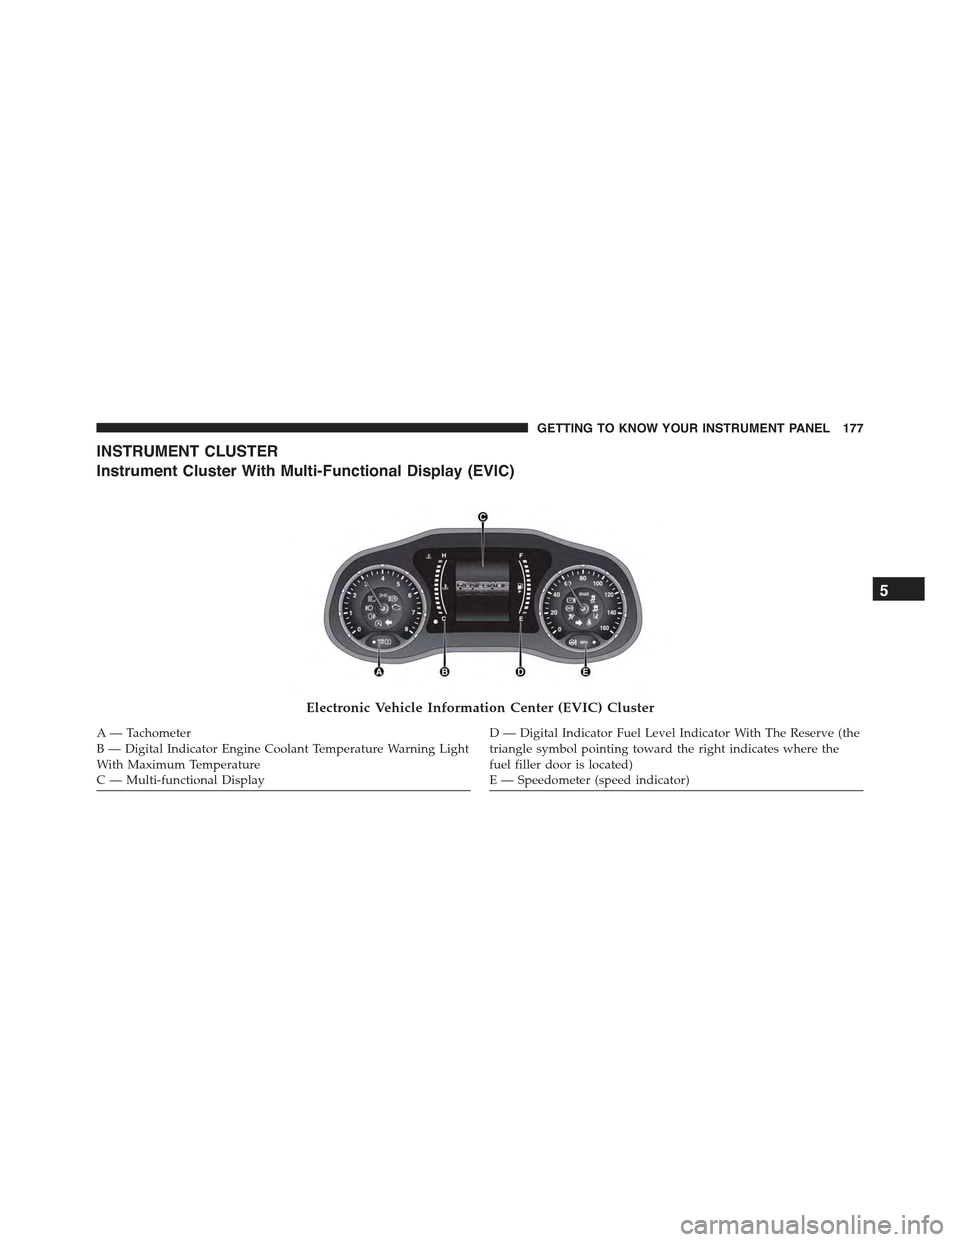 JEEP RENEGADE 2015 1.G Owners Guide INSTRUMENT CLUSTER
Instrument Cluster With Multi-Functional Display (EVIC)
Electronic Vehicle Information Center (EVIC) Cluster
A — TachometerB—DigitalIndicatorEngineCoolantTemperatureWarningLight